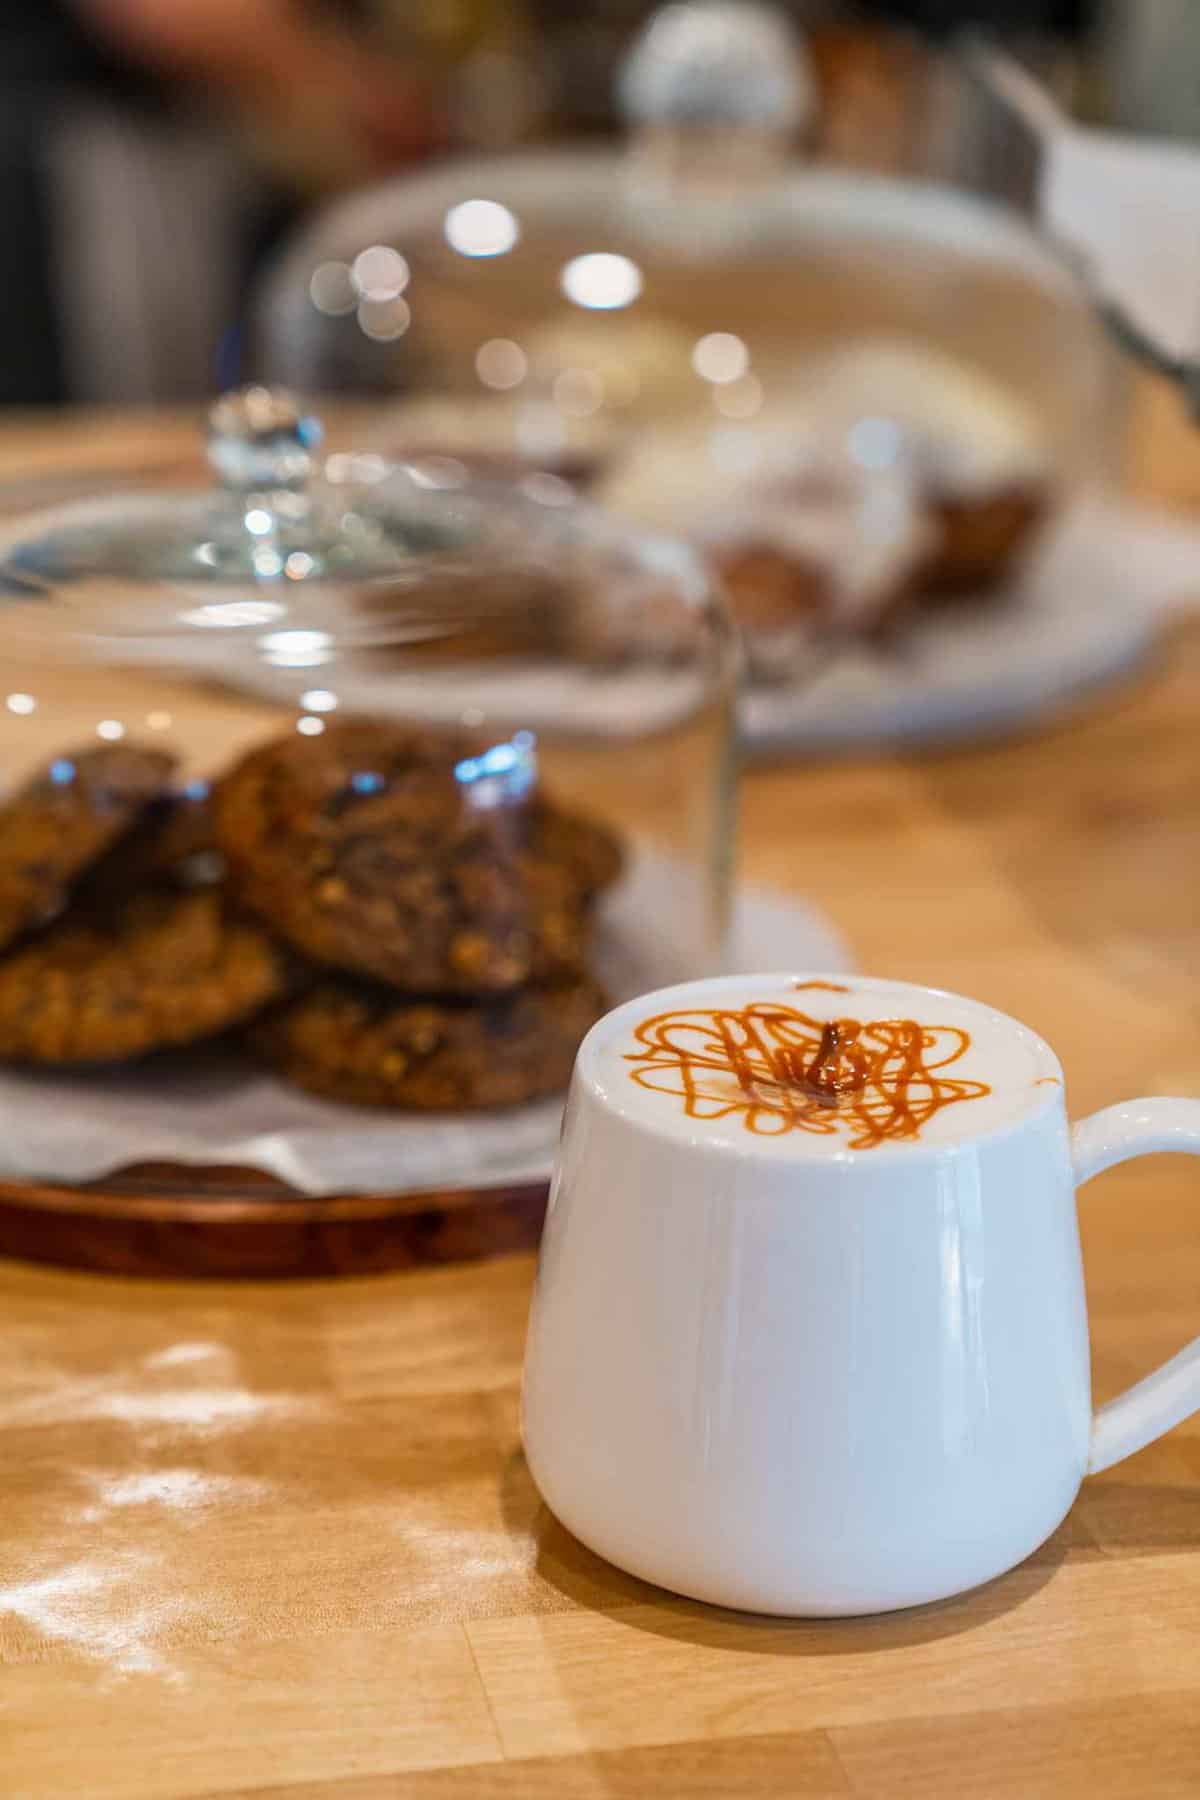 A cup of cappuccino with chocolate cookies at the background